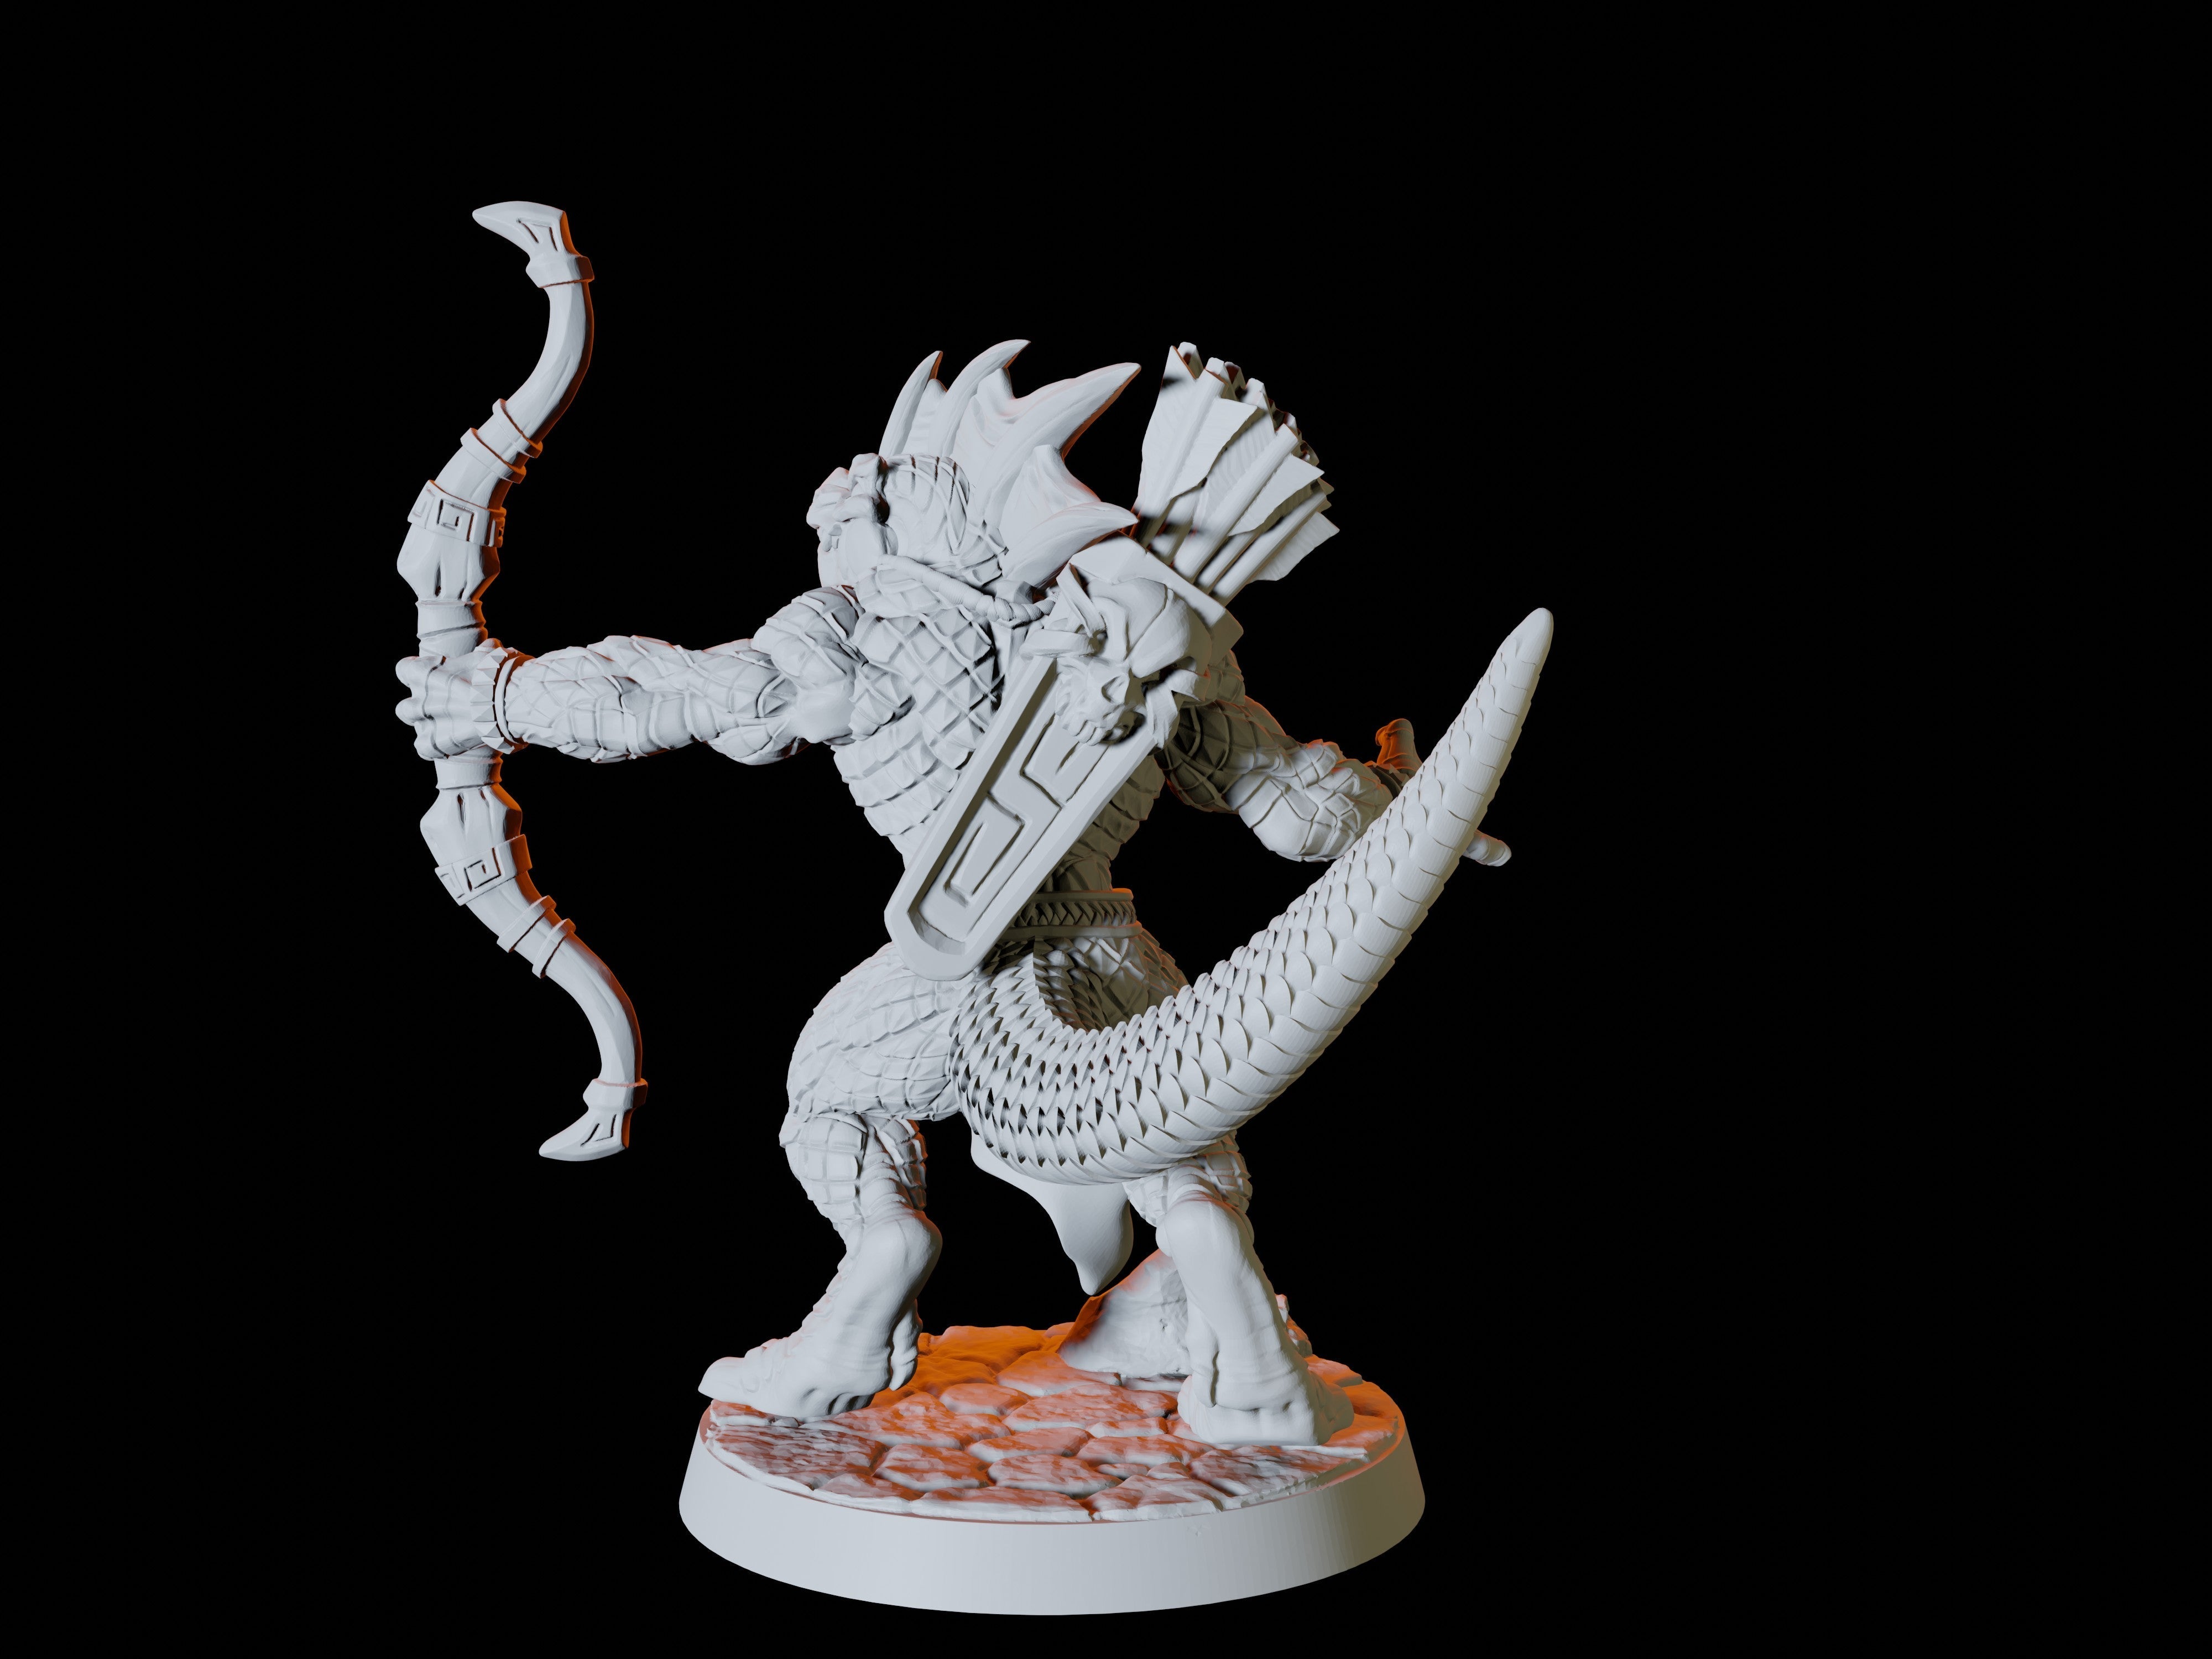 Six Lizardfolk Miniatures for Dungeons and Dragons - Myth Forged